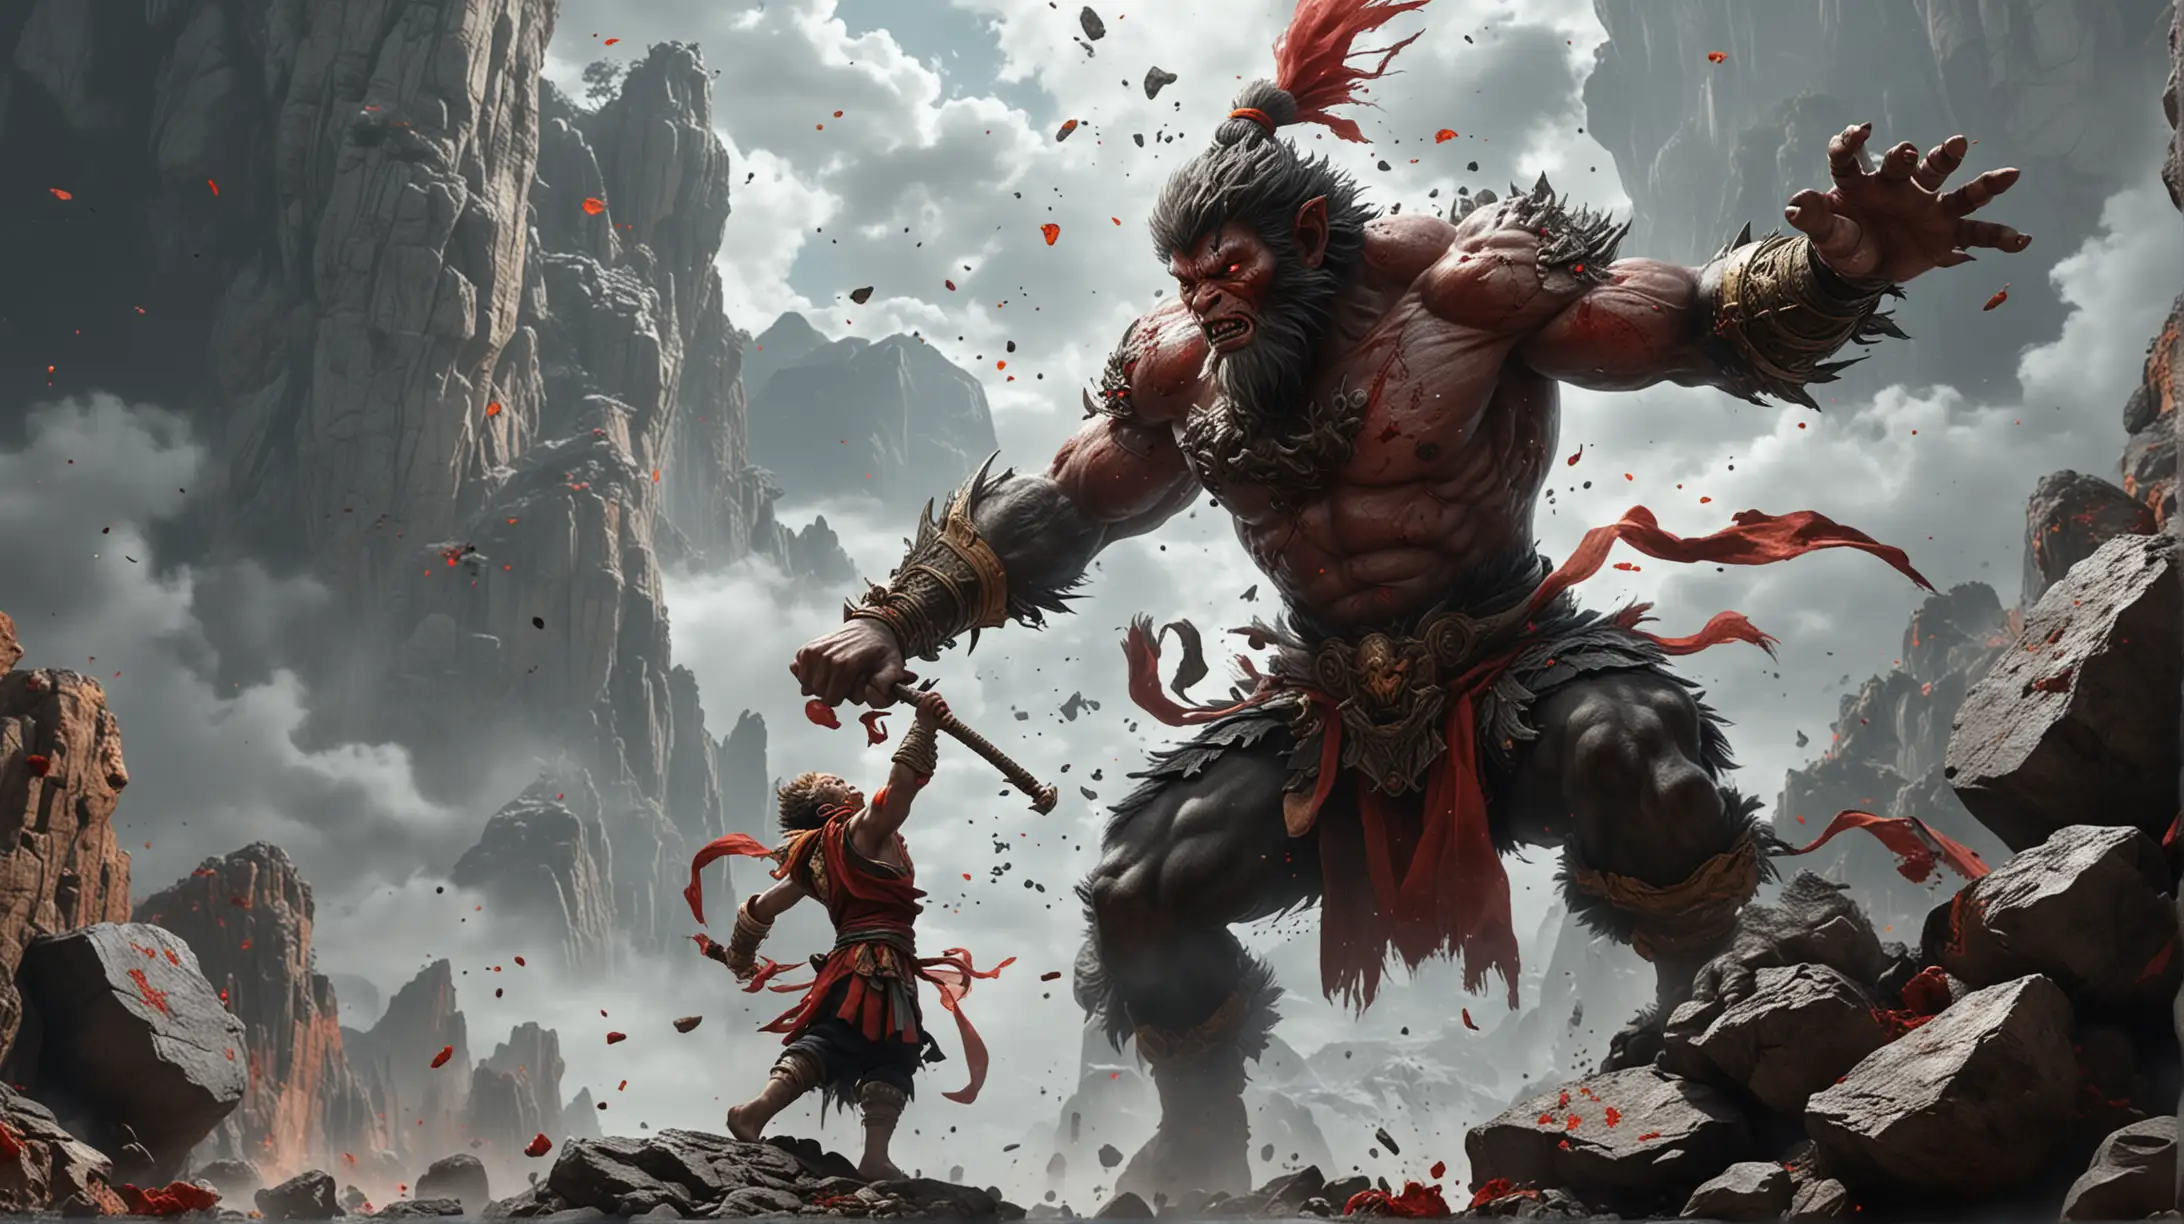 Generate a 4K hyperrealistic image depicting the son god wukong fighting a big stone giant, in the skies, all bloodied.